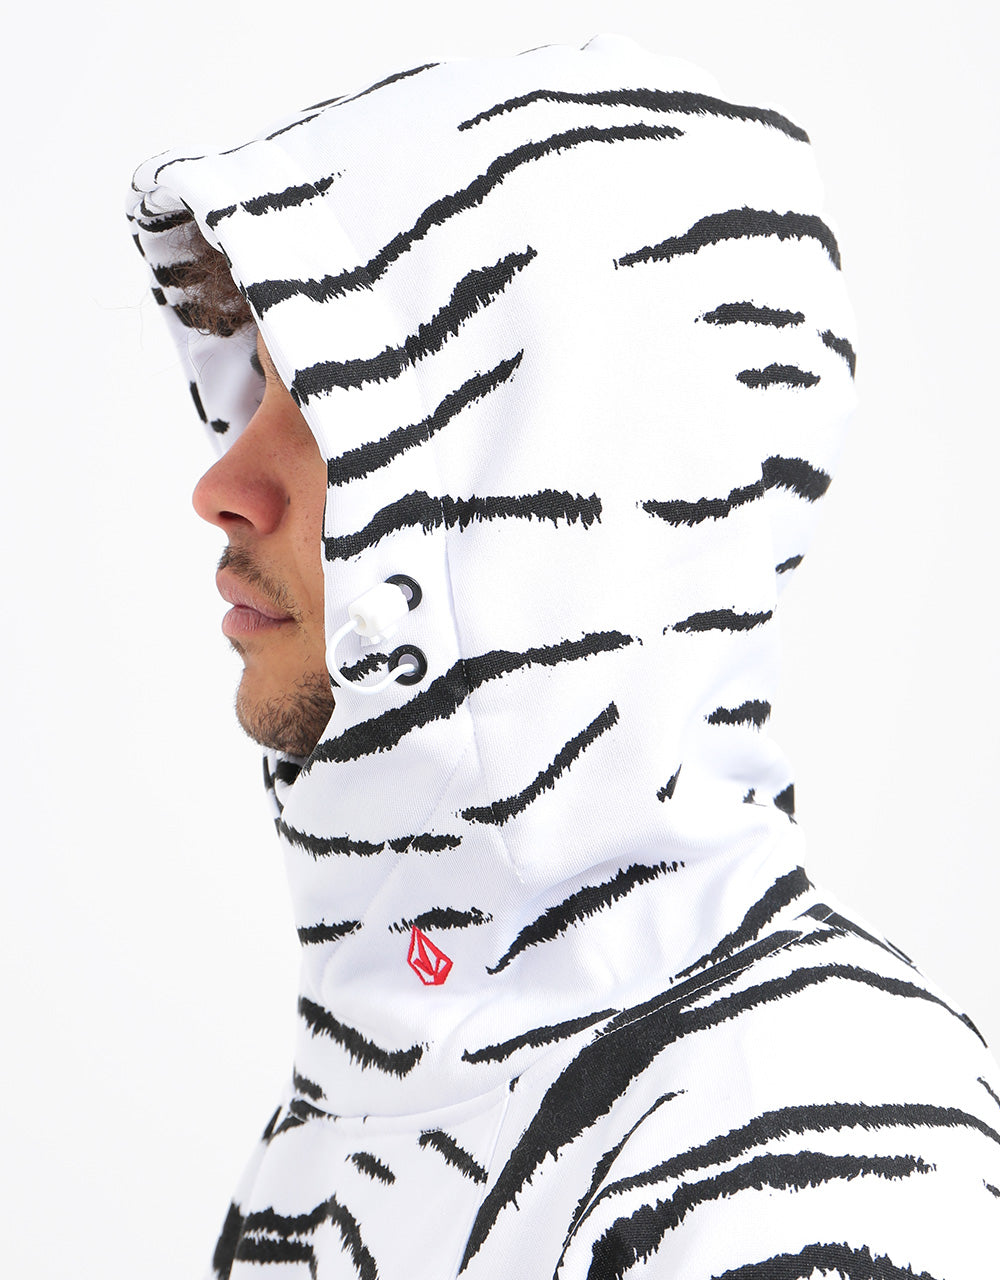 Volcom Hydro Riding Pullover Hoodie - White Tiger